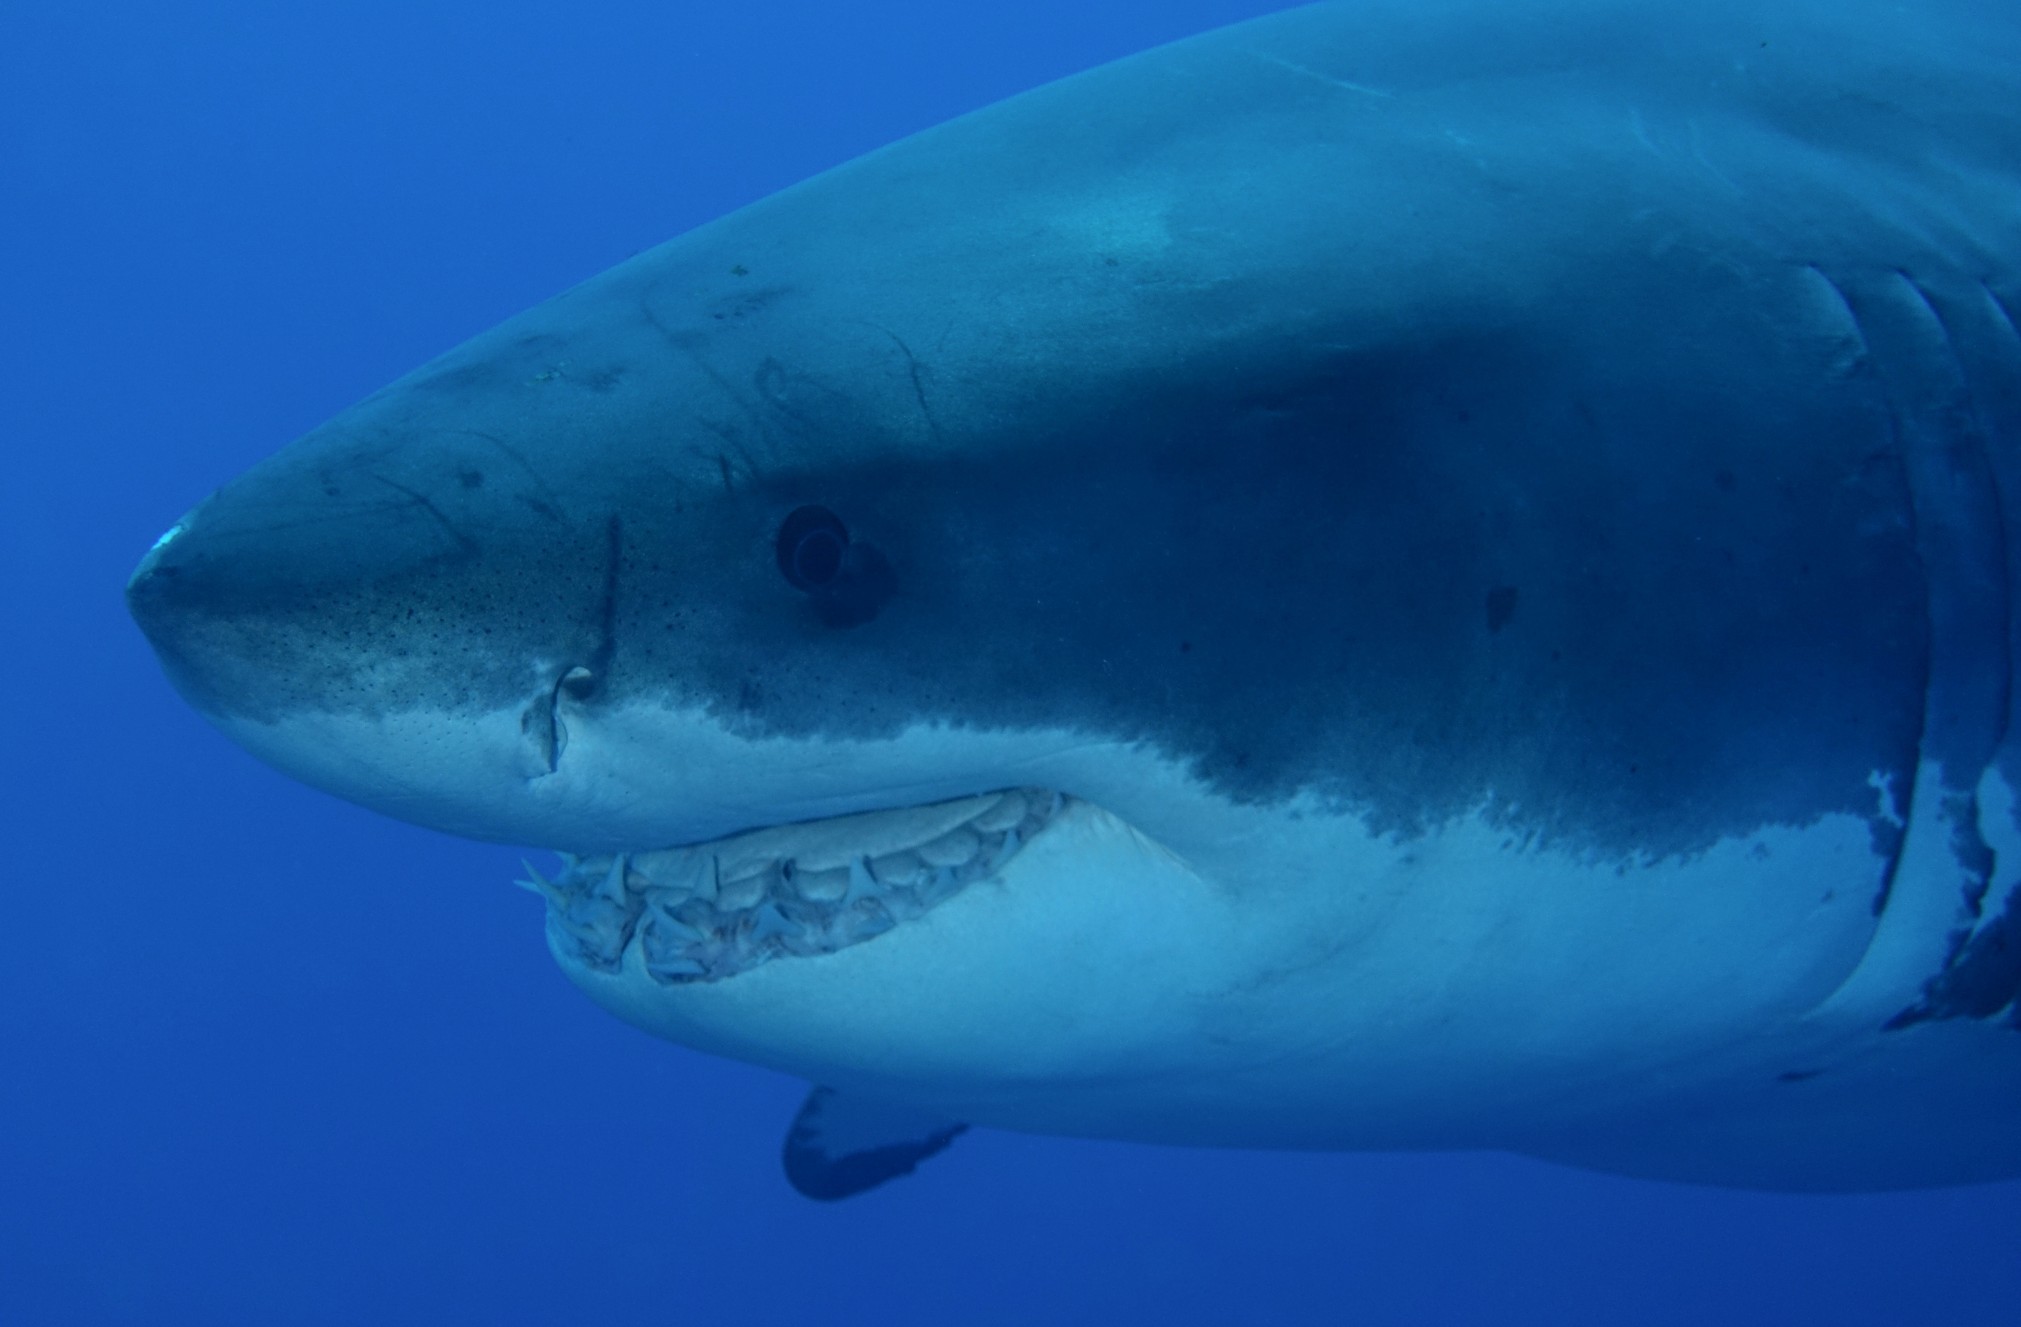 Toothy grin of a great white shark up close